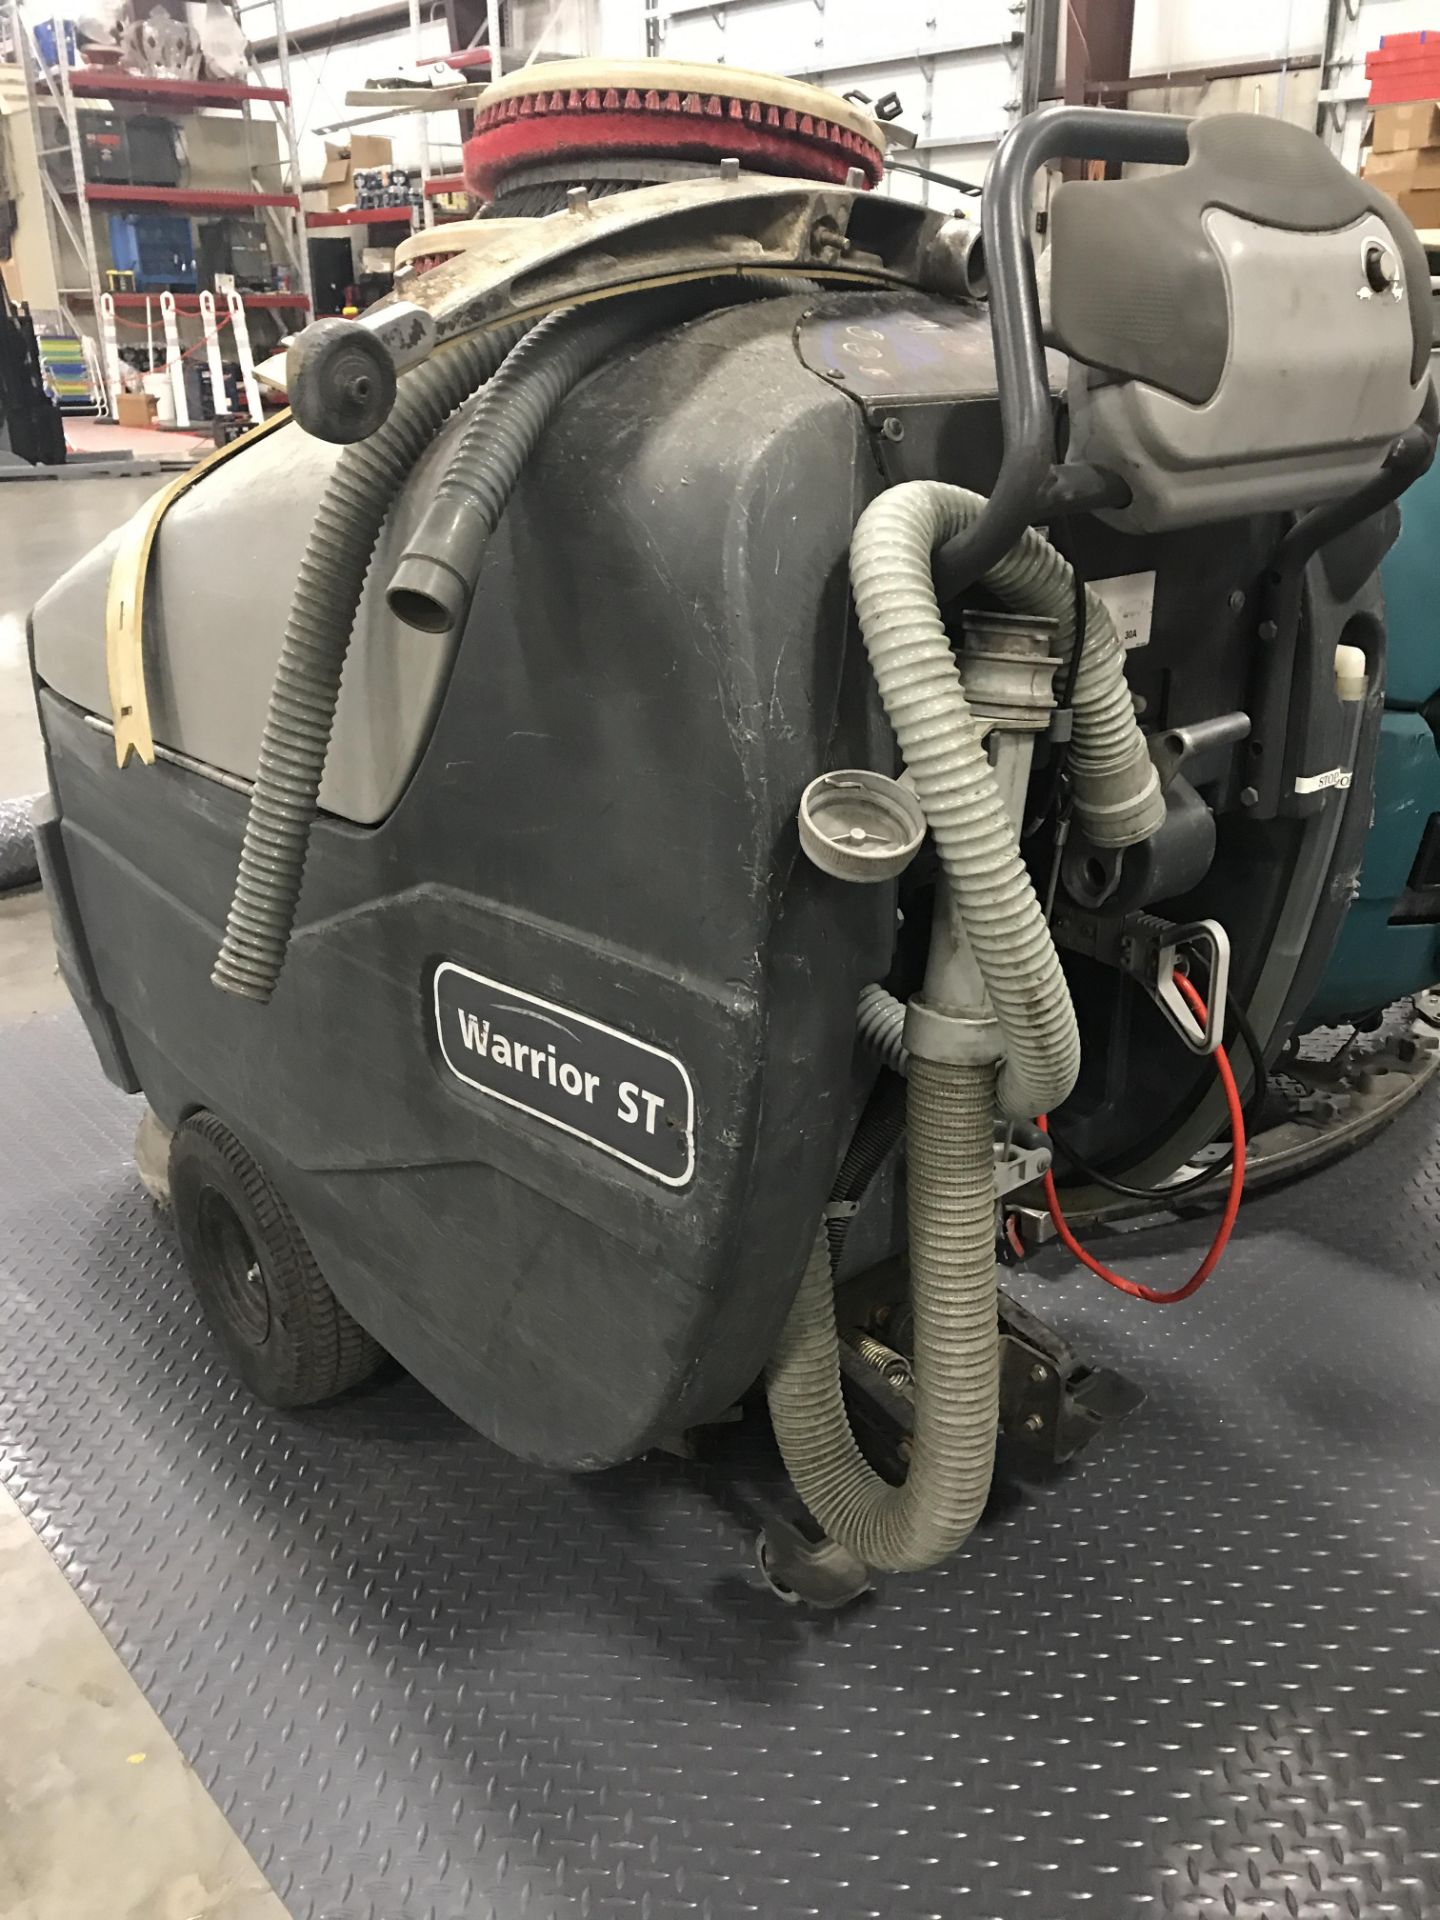 TENNANT ADVANCE WARRIOR ST. FLOOR SWEEPER/SCRUBBER, 623.1 HOURS SHOWING - Image 2 of 5